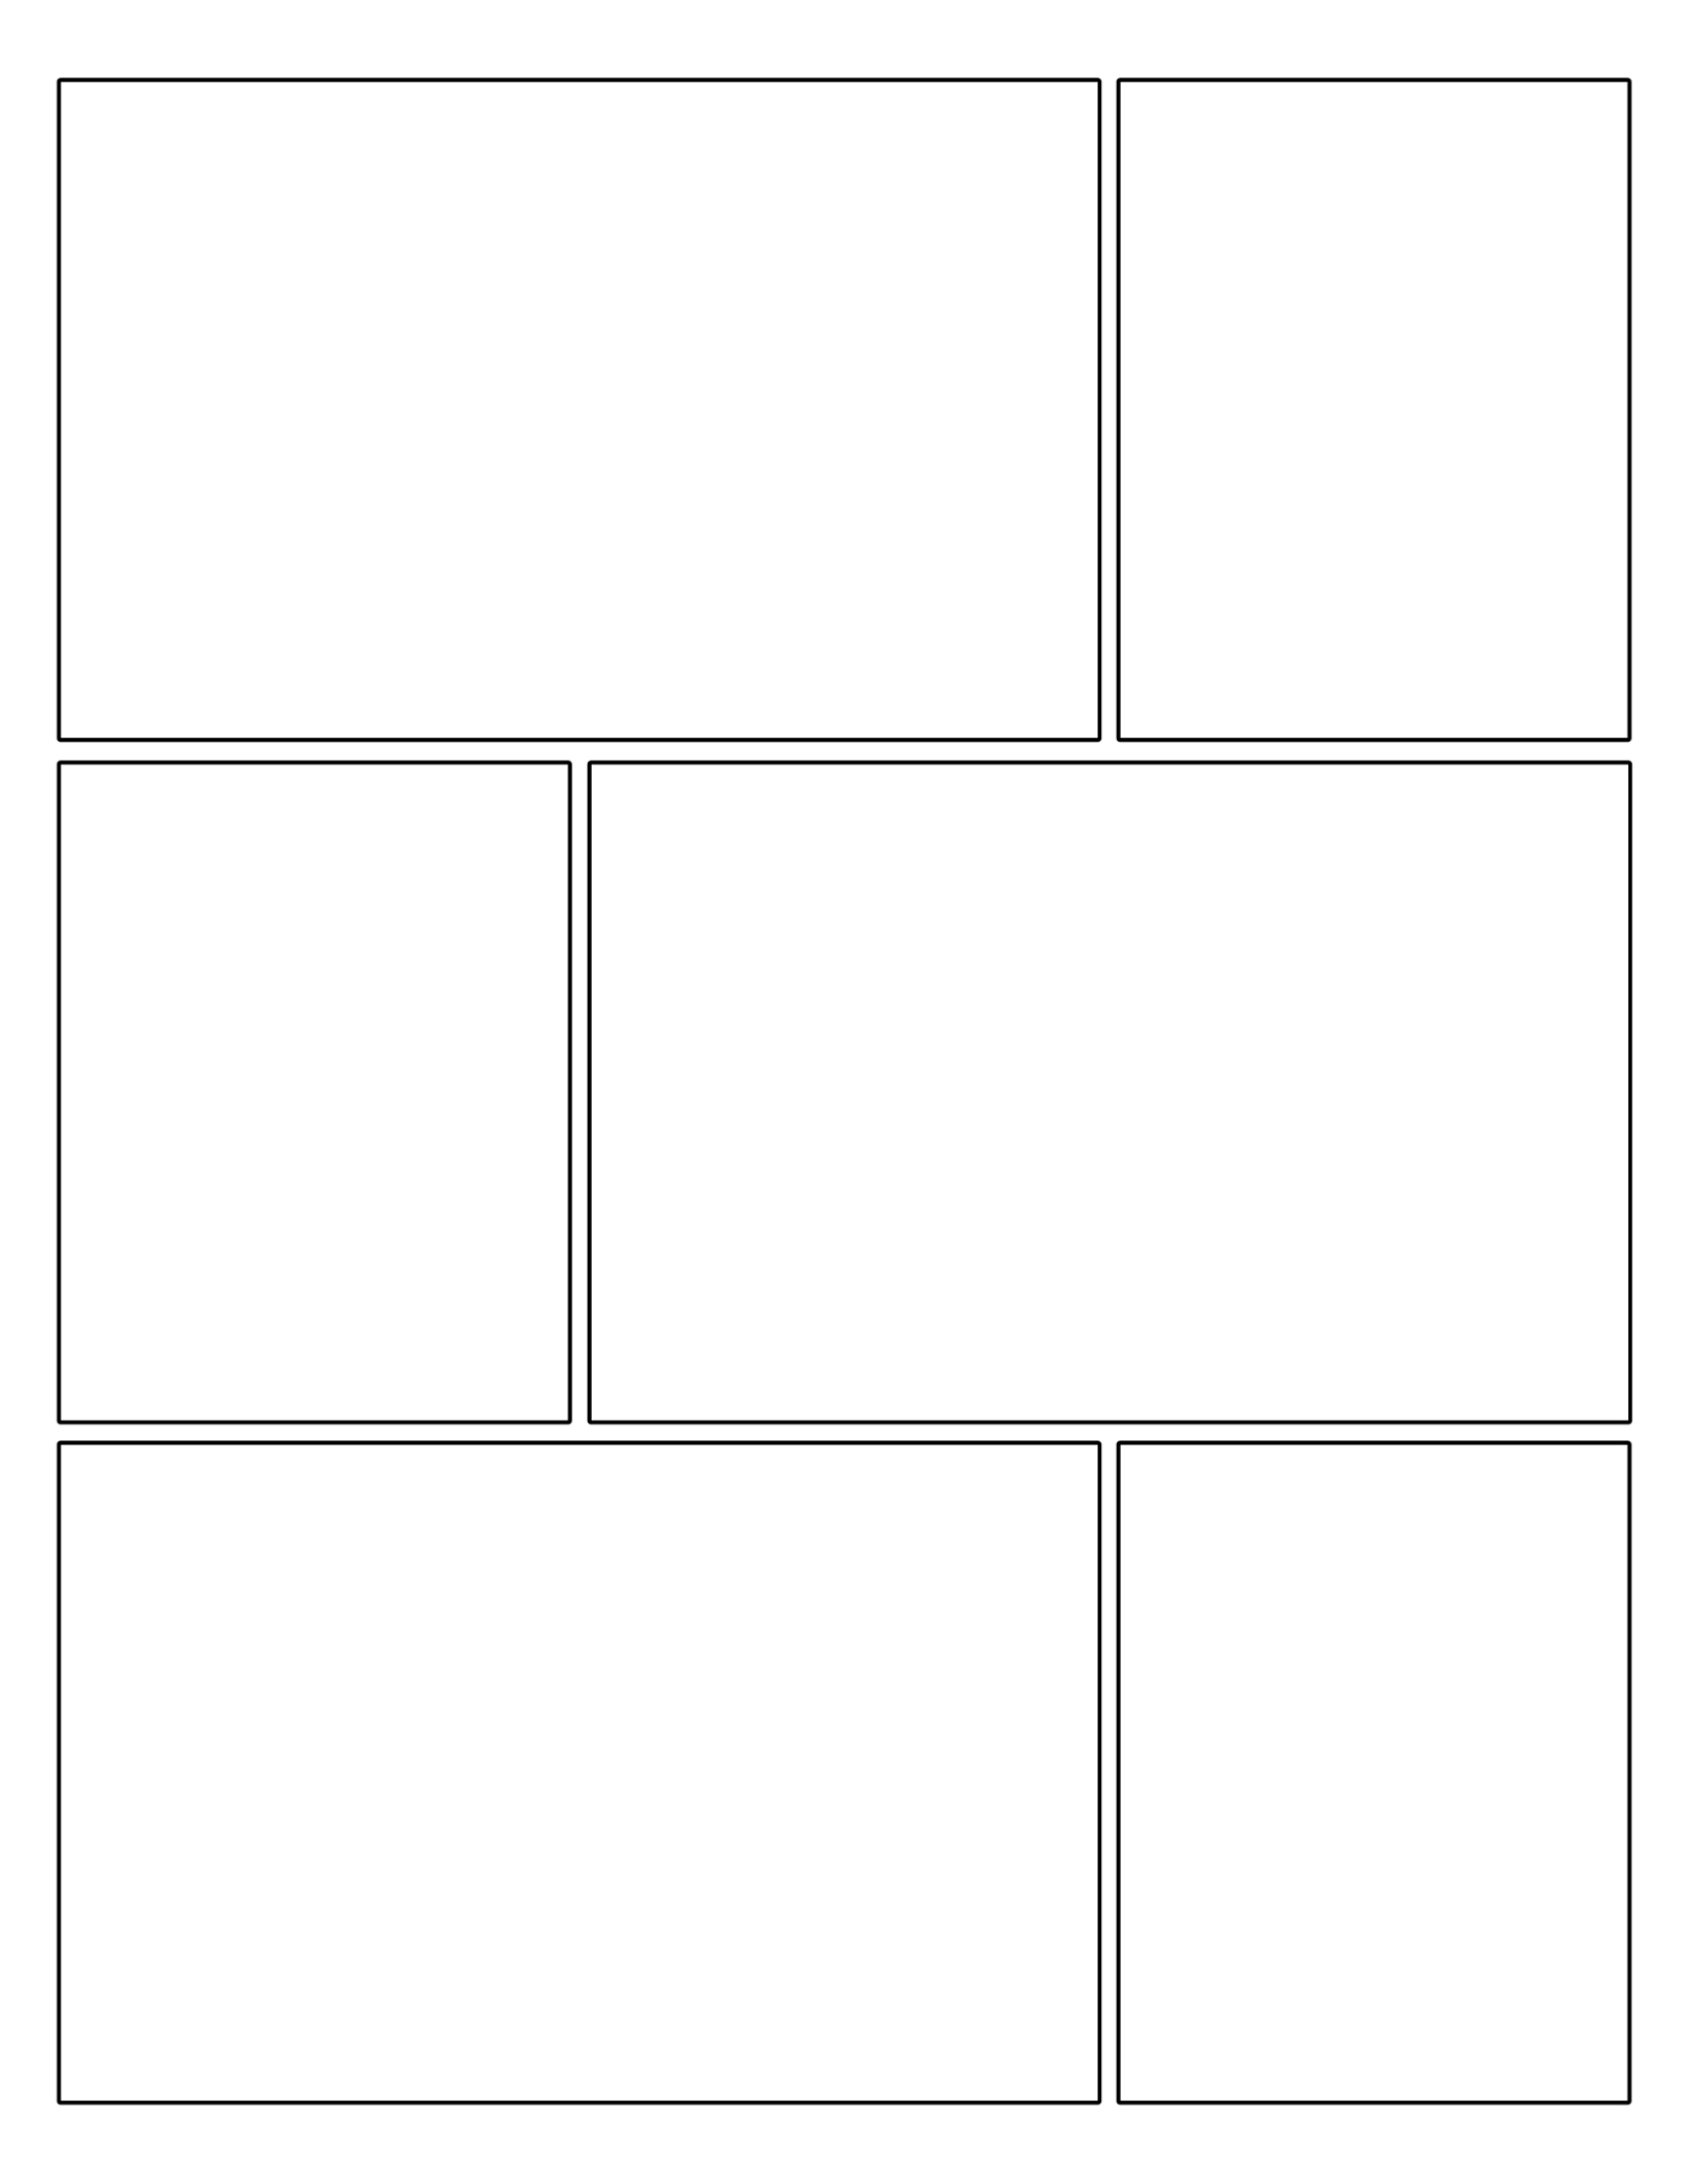 Free Printable Comic Strip Template Pages - Paper Trail Design Inside Printable Blank Comic Strip Template For Kids